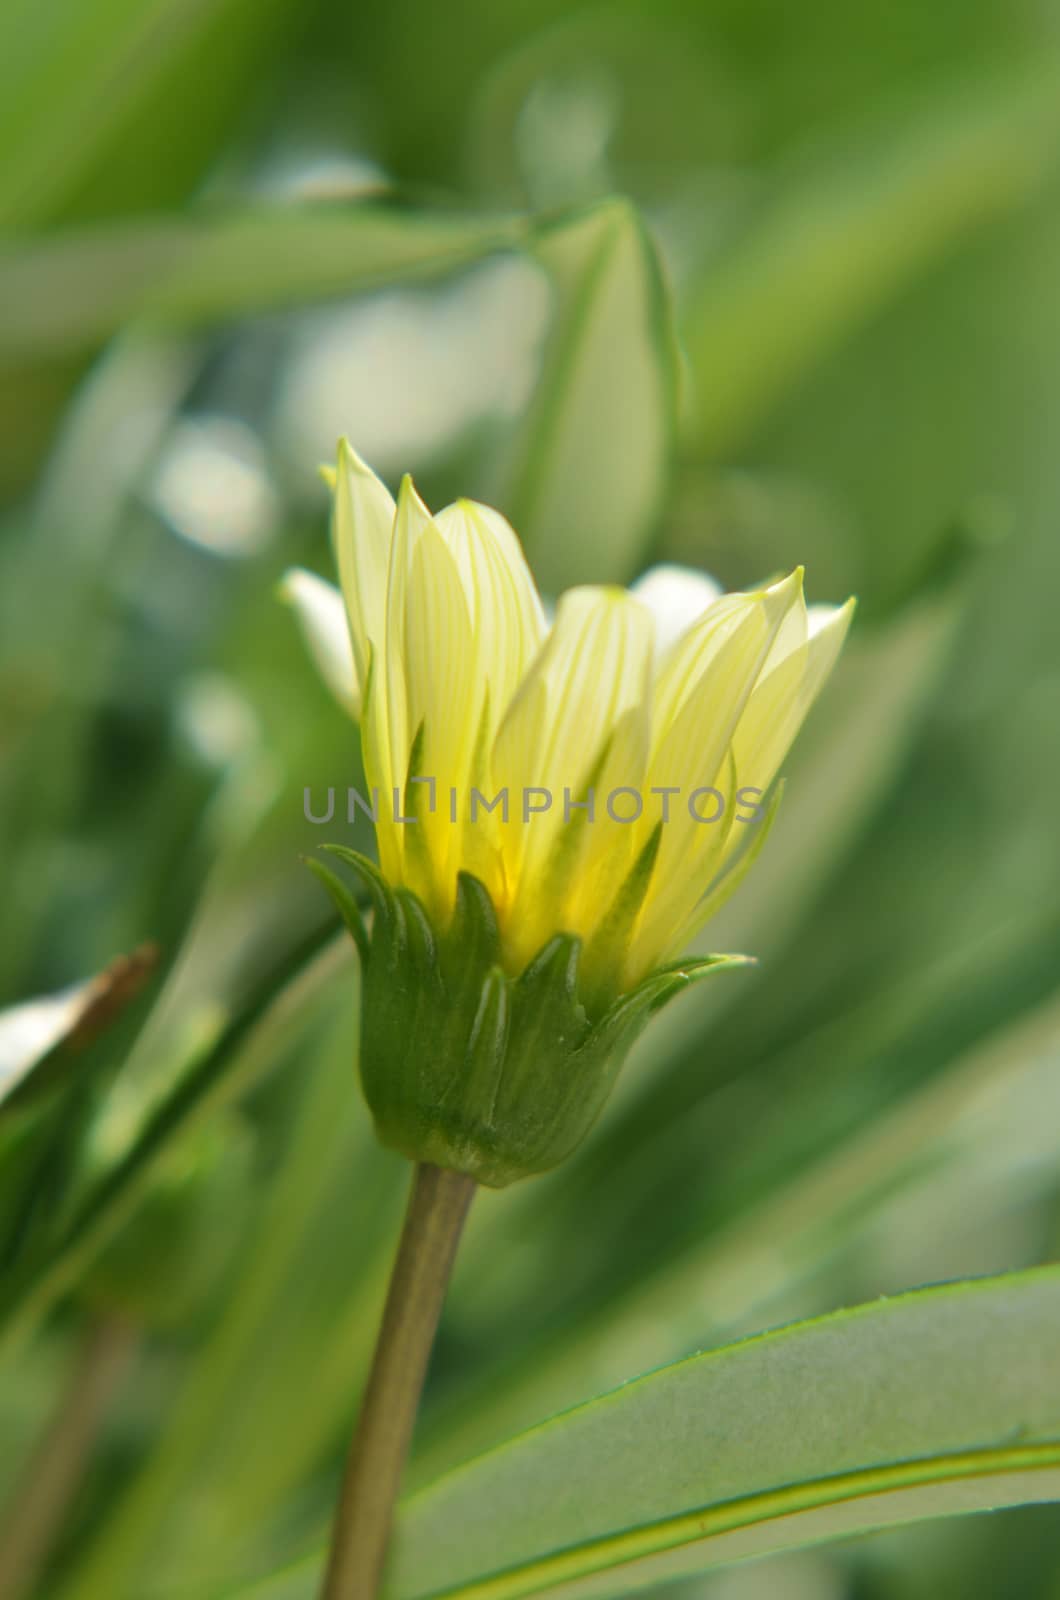 Solitary yellow flower bud in the garden shined at sun